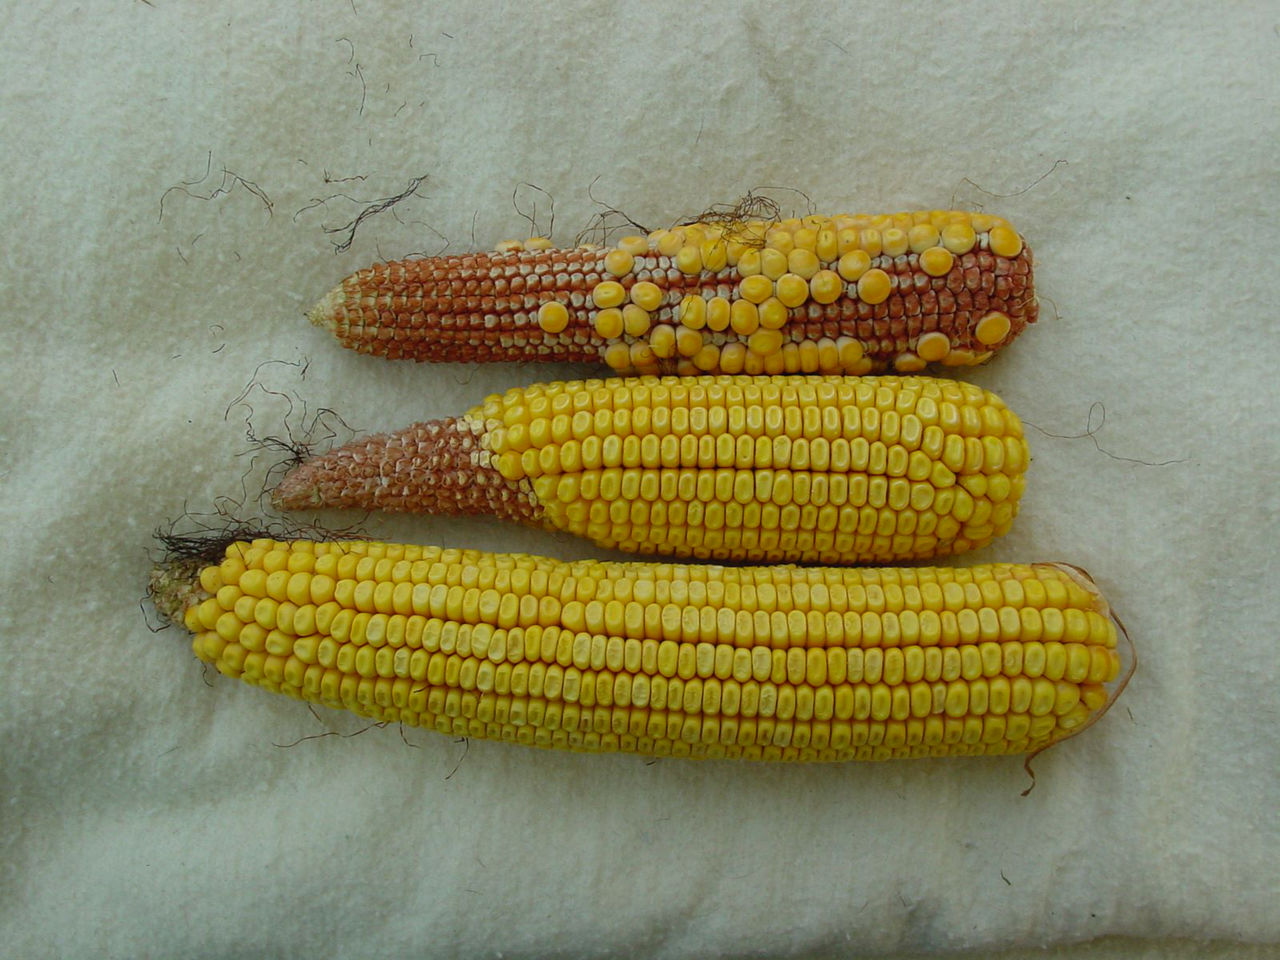  A variety of cobs could be gathered by combines in drought-stressed fields. Adjustments should favor keeping combines operating at a full load to support ear on ear shelling. 